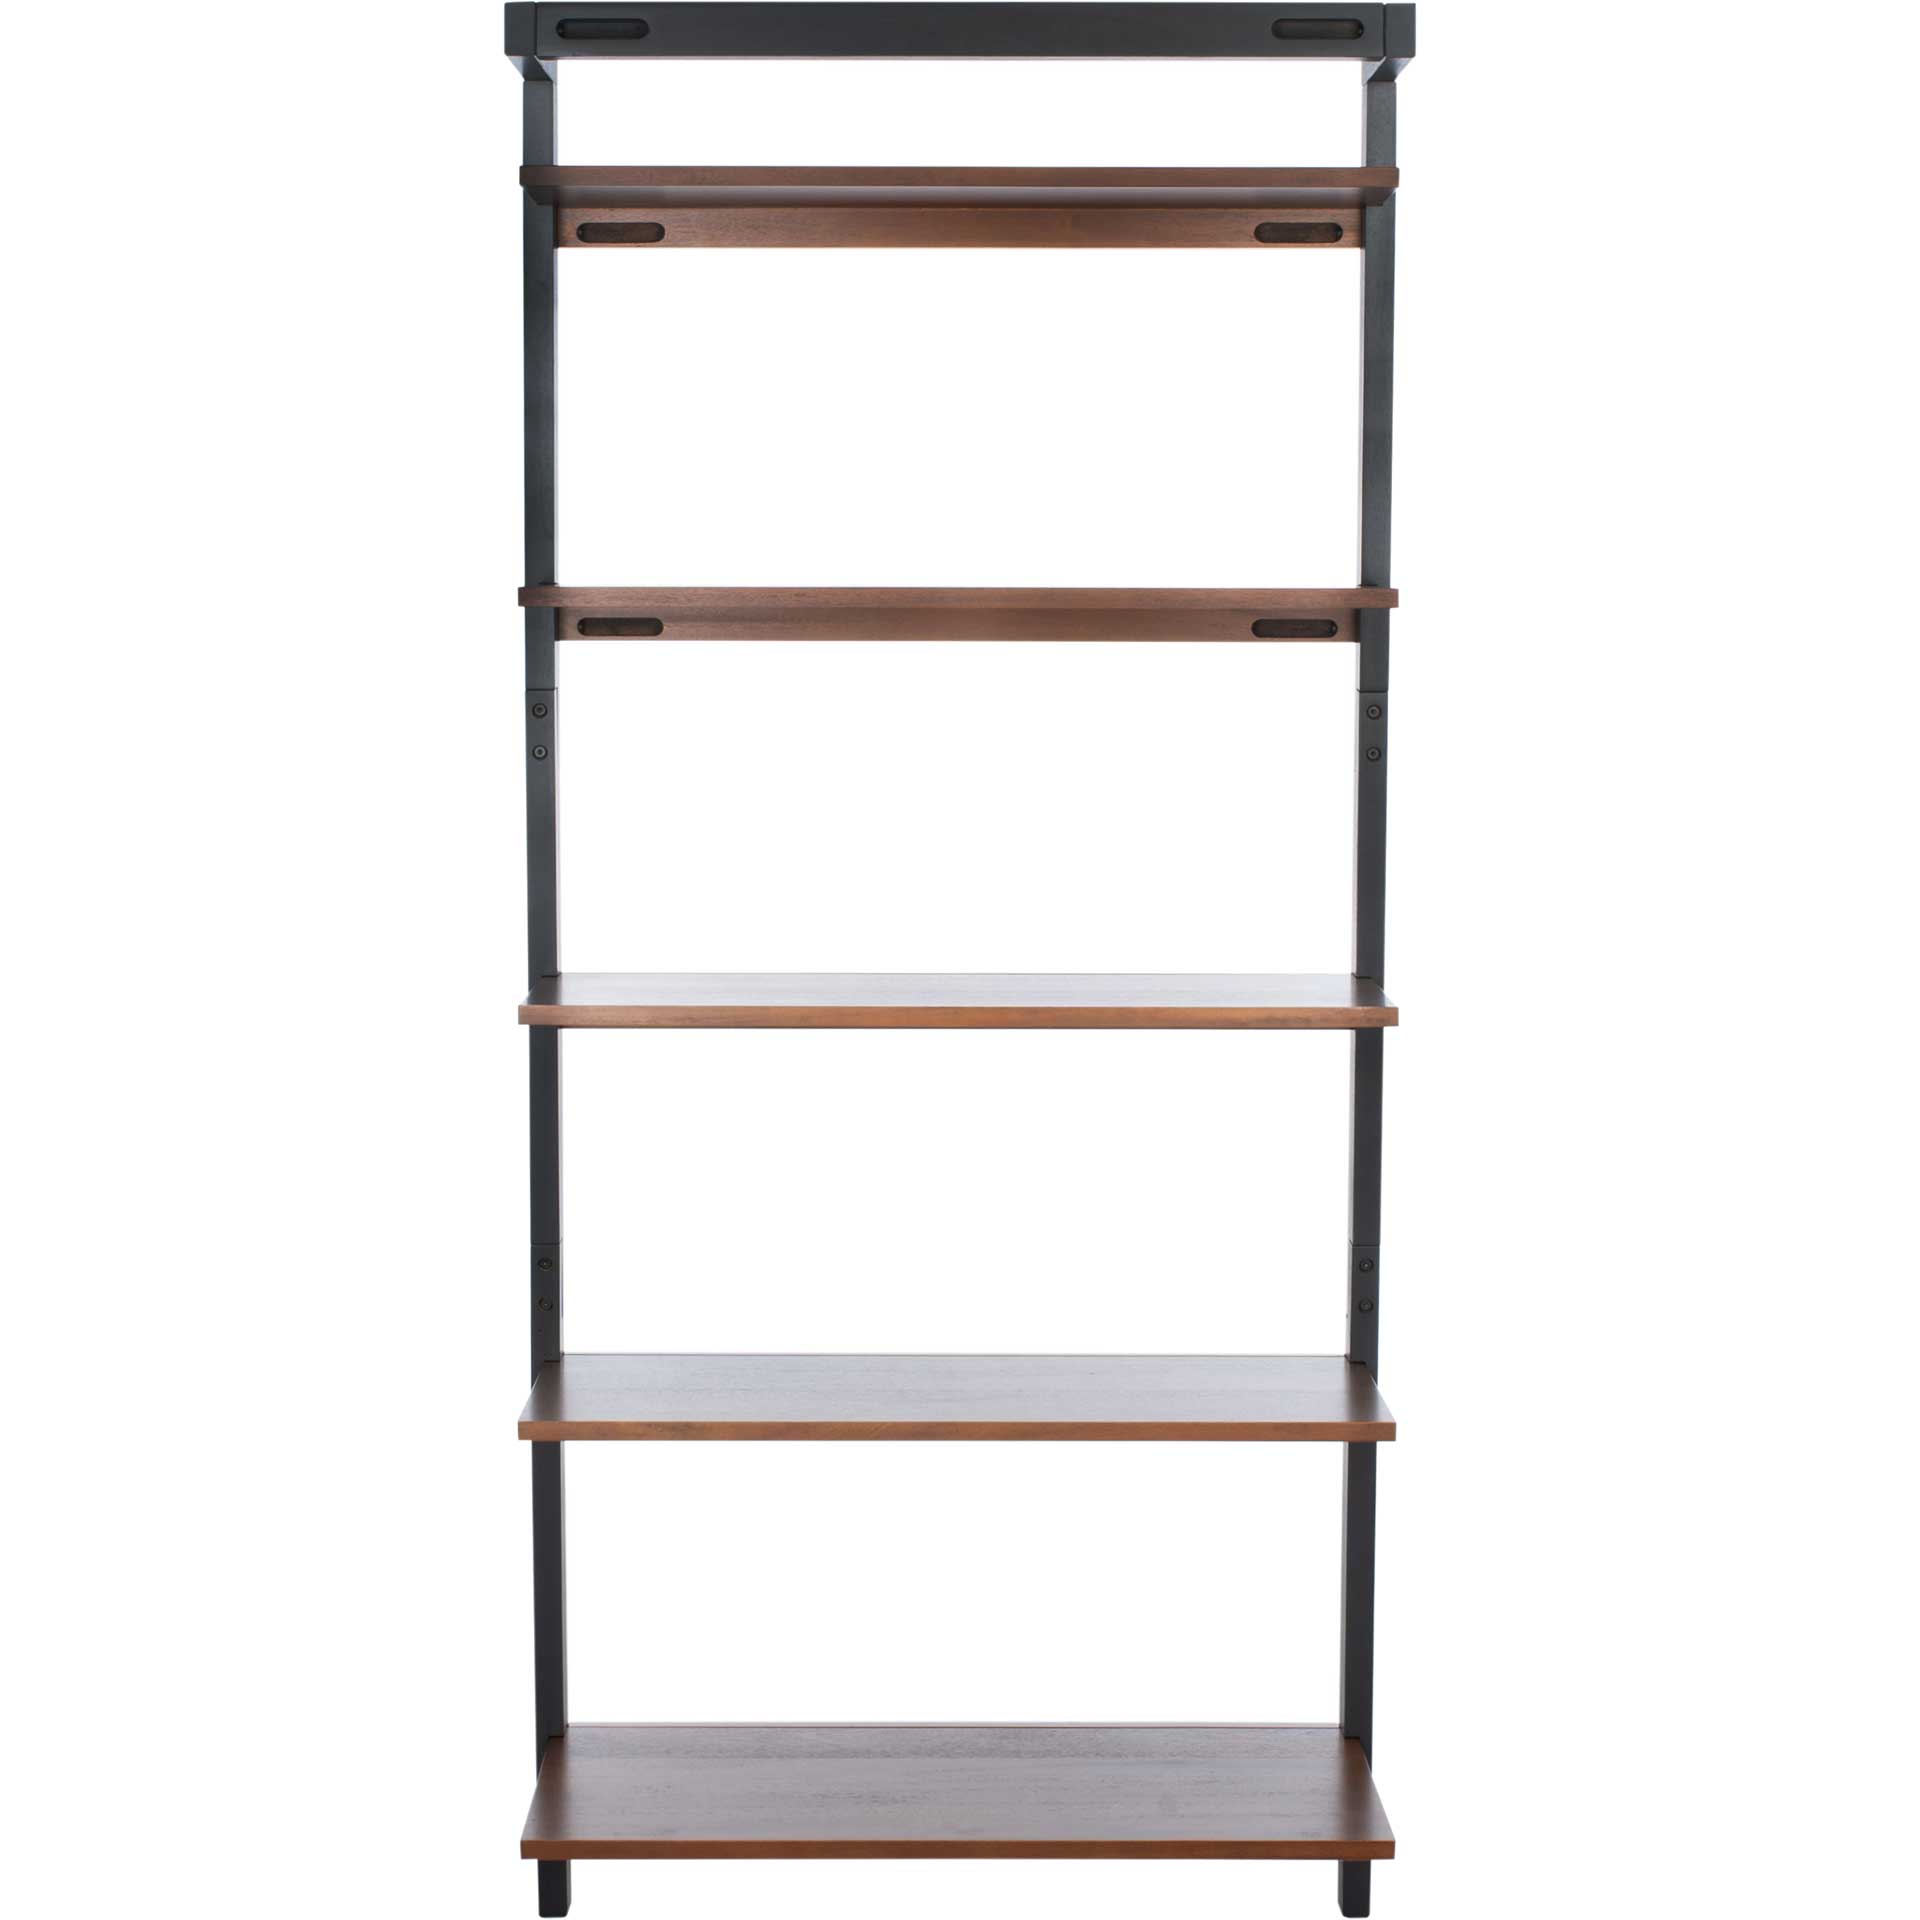 Belami 5 Tier Leaning Etagere Honey Brown/Charcoal